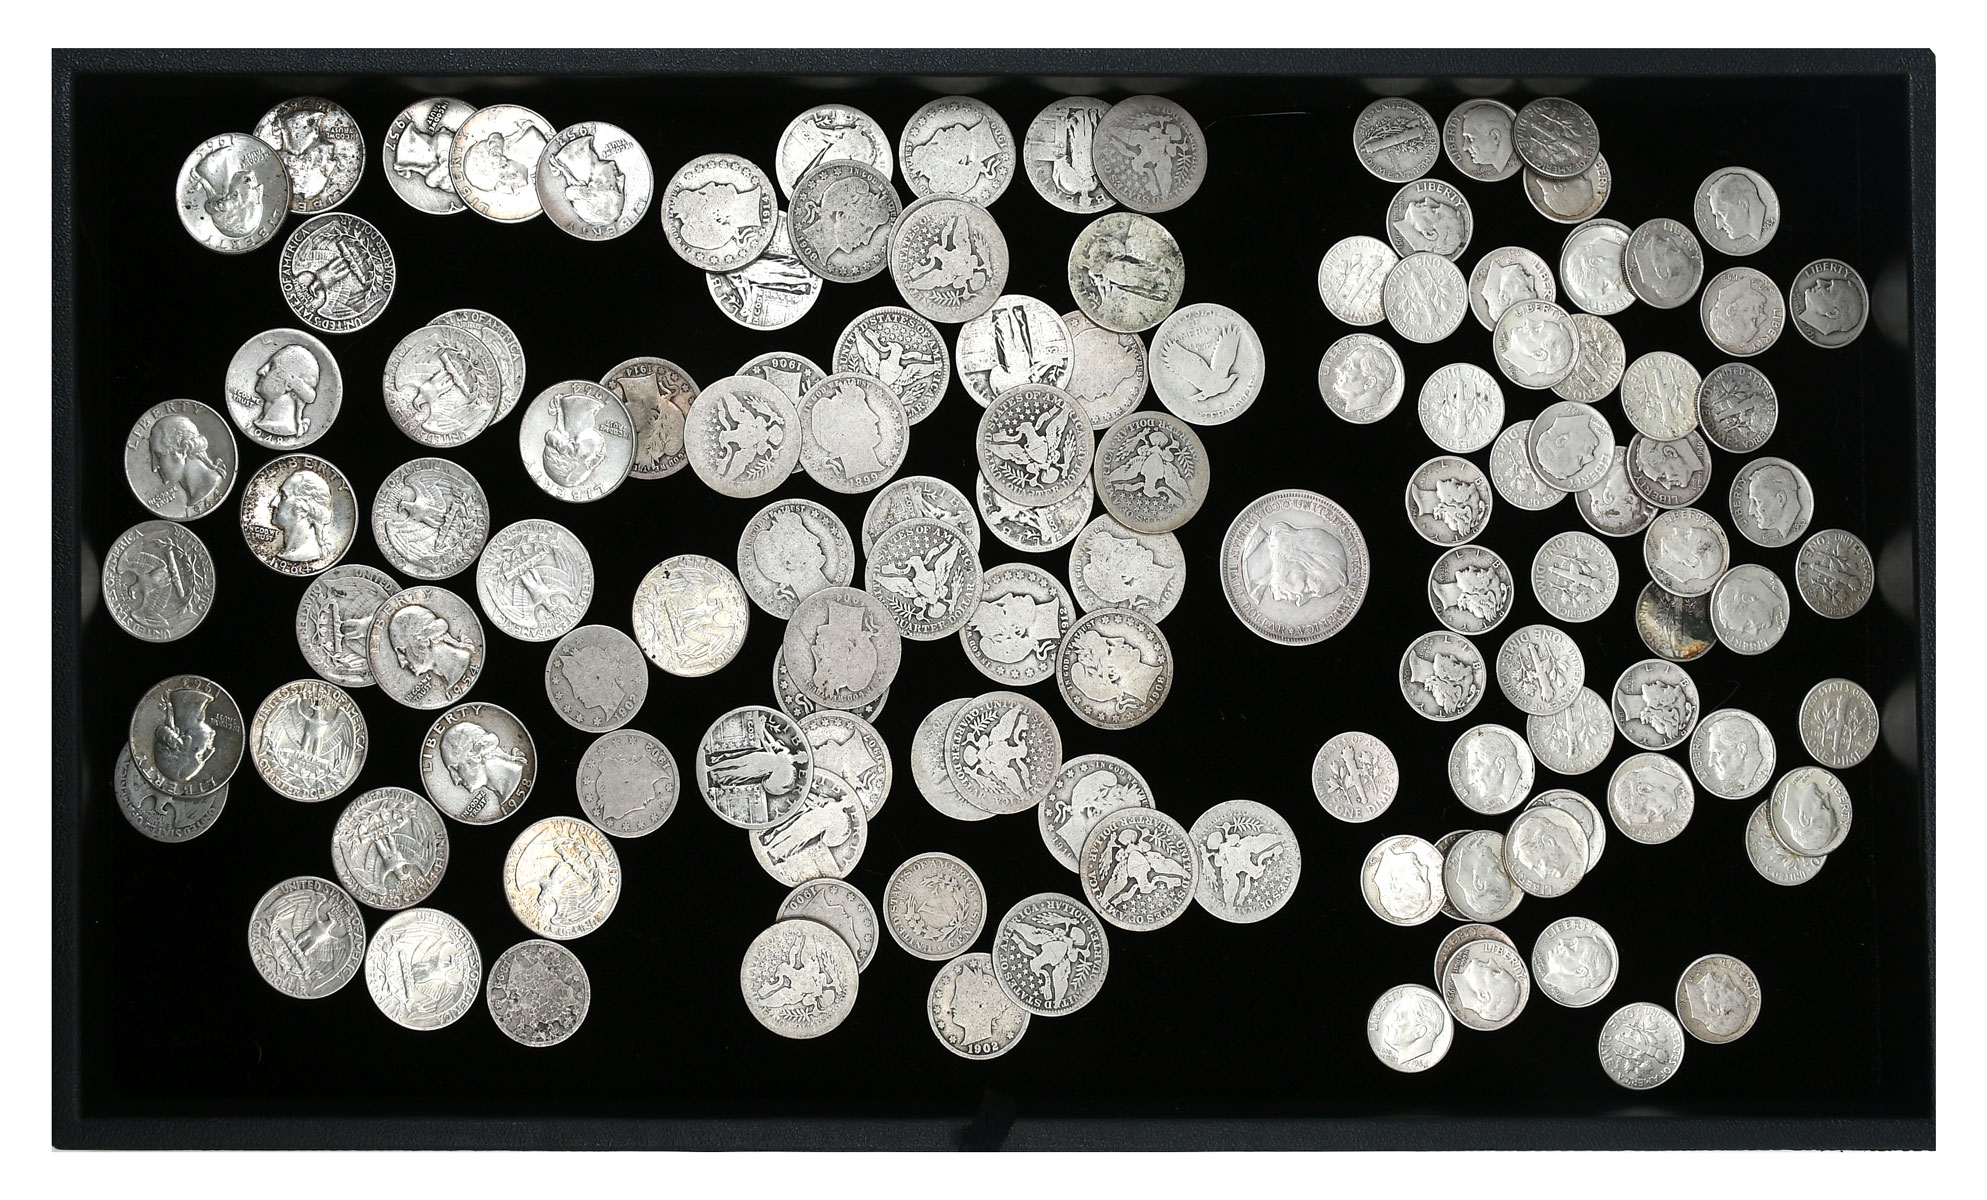 125 PC. UNITED STATES SILVER COIN